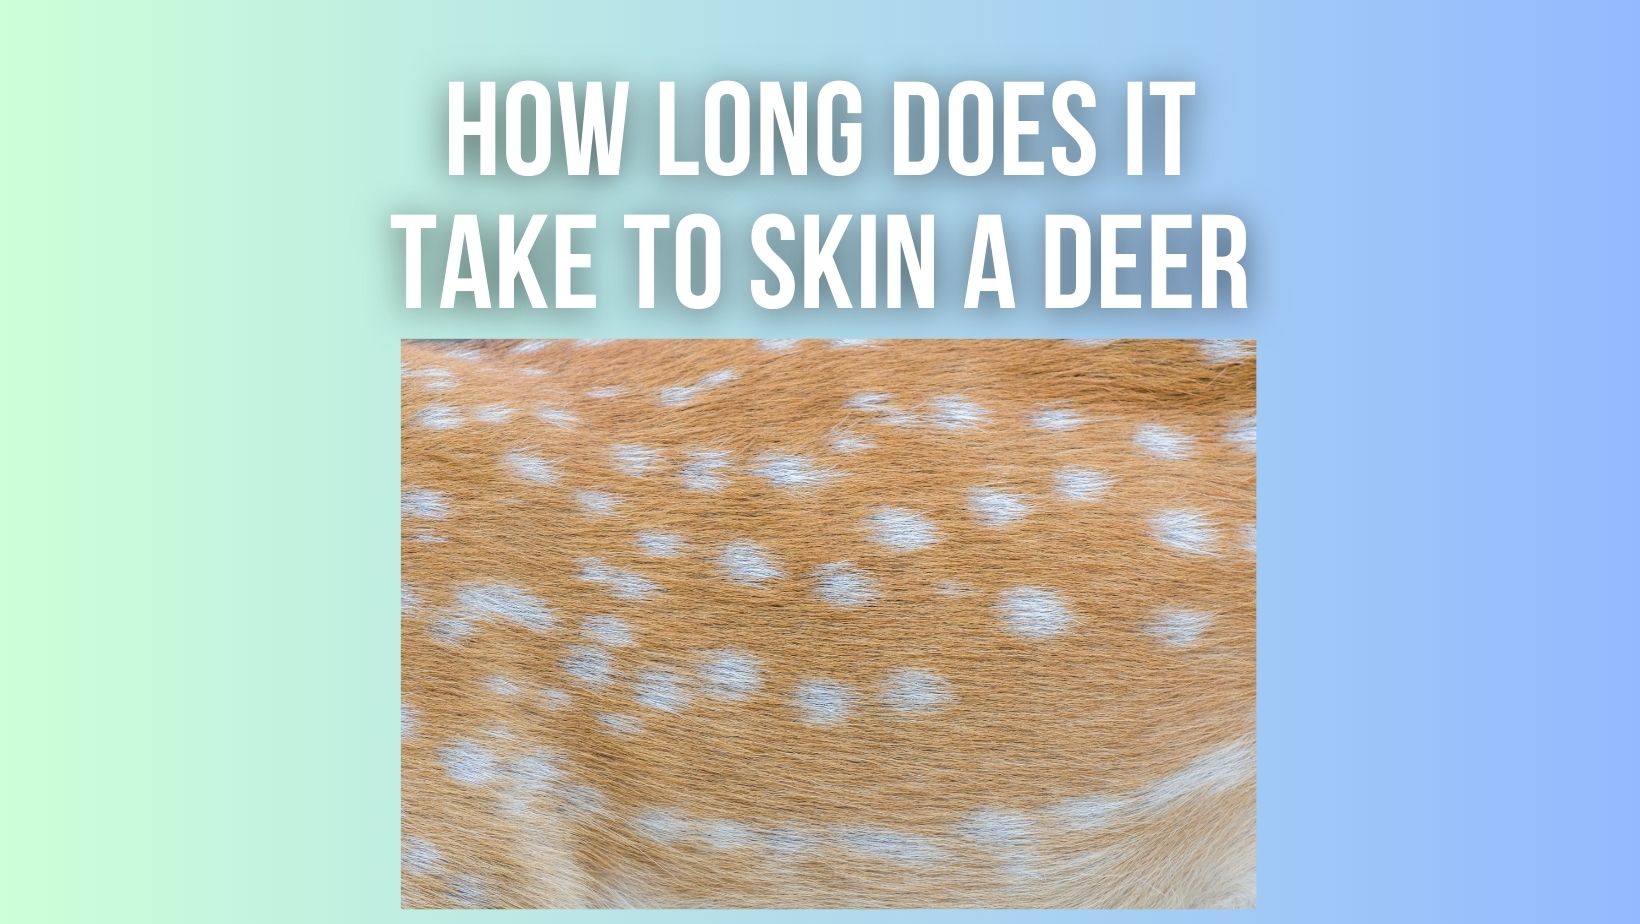 How Long Does It Take To Skin A Deer